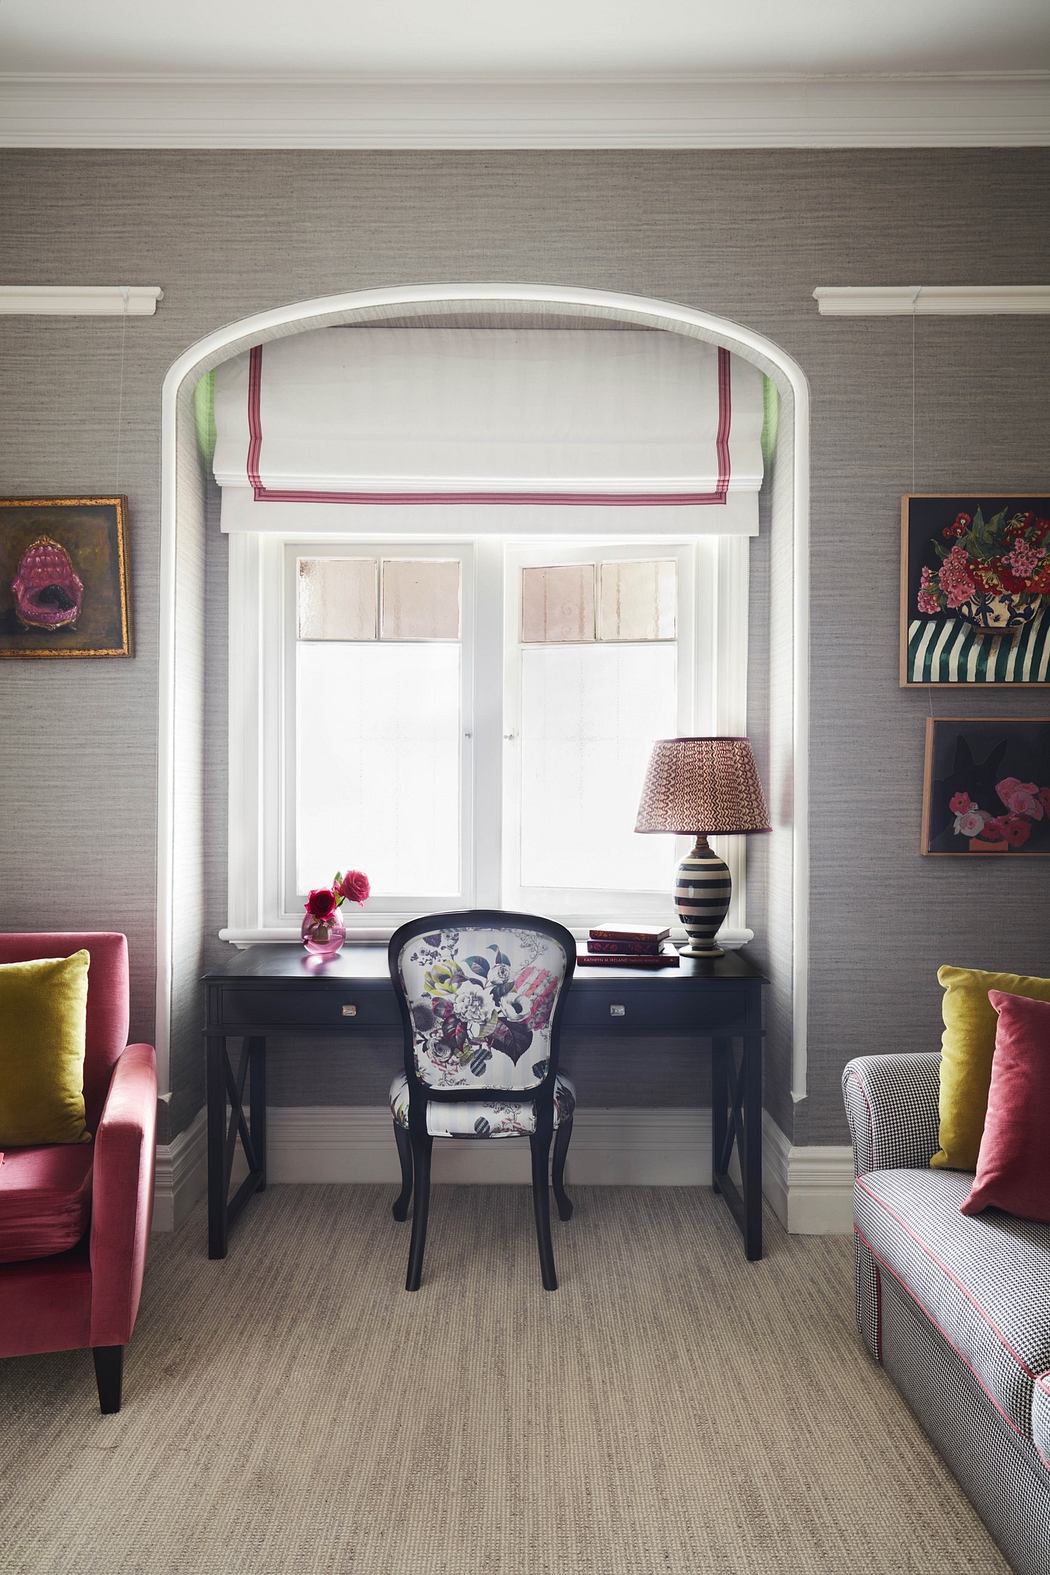 Elegant study nook with arched window, classic desk, and vibrant chairs